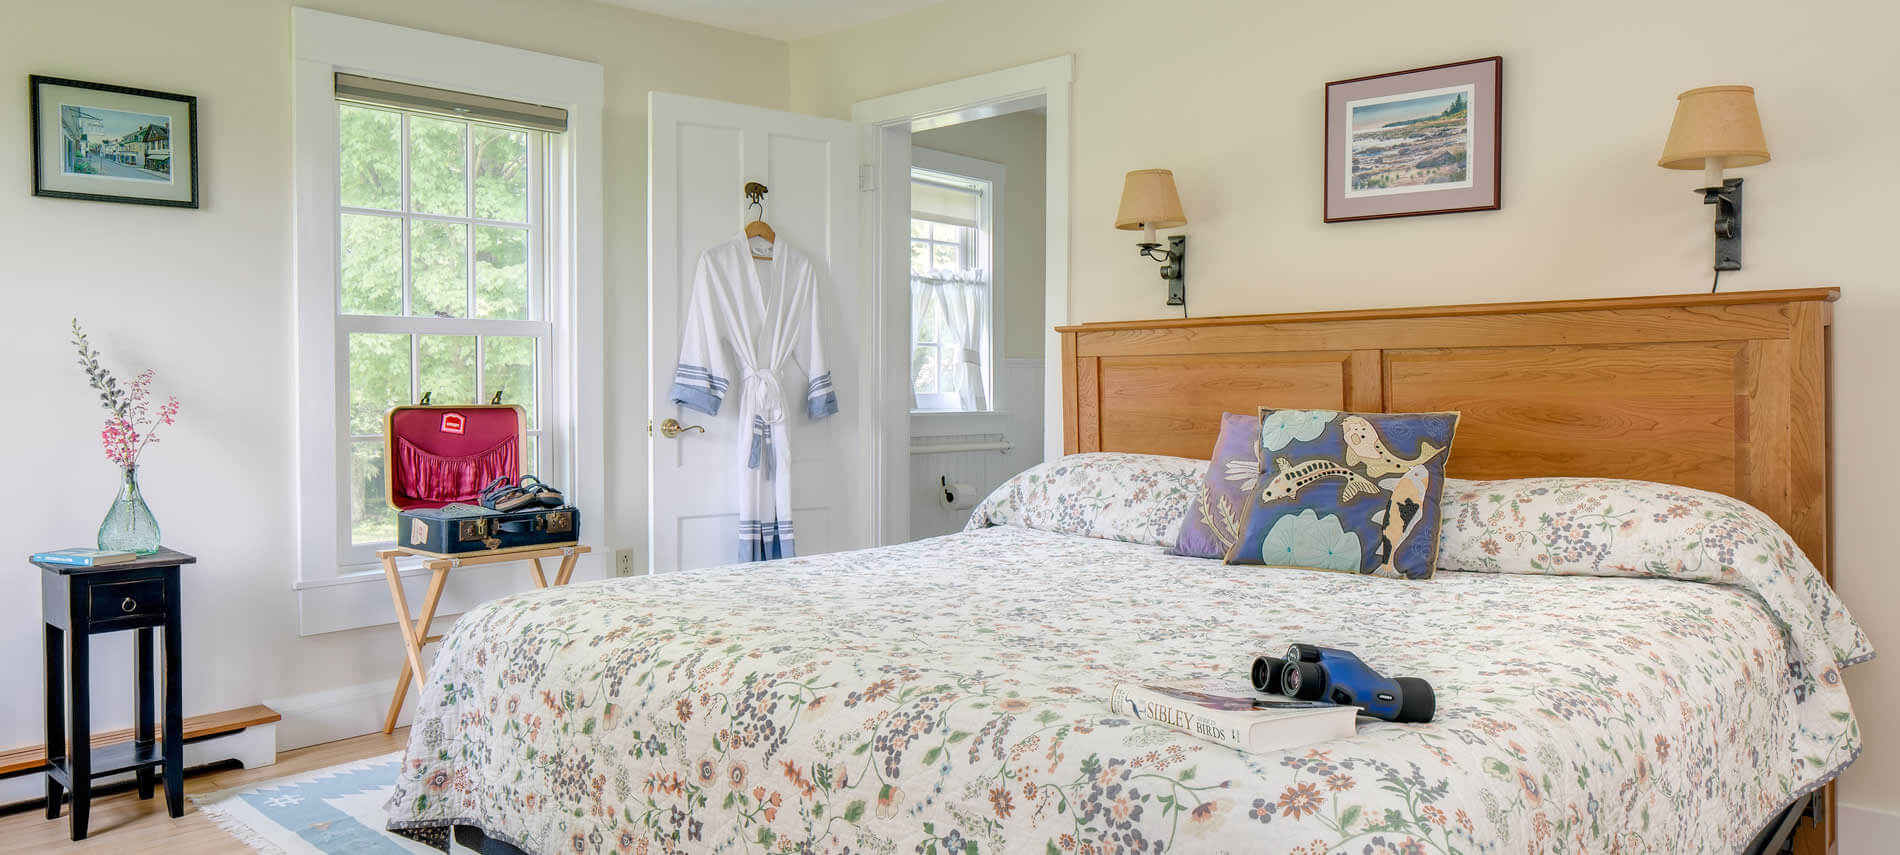 Bright beige room with trim and doors, wood floor, and two sconce lights over a wood bed with floral bedspread